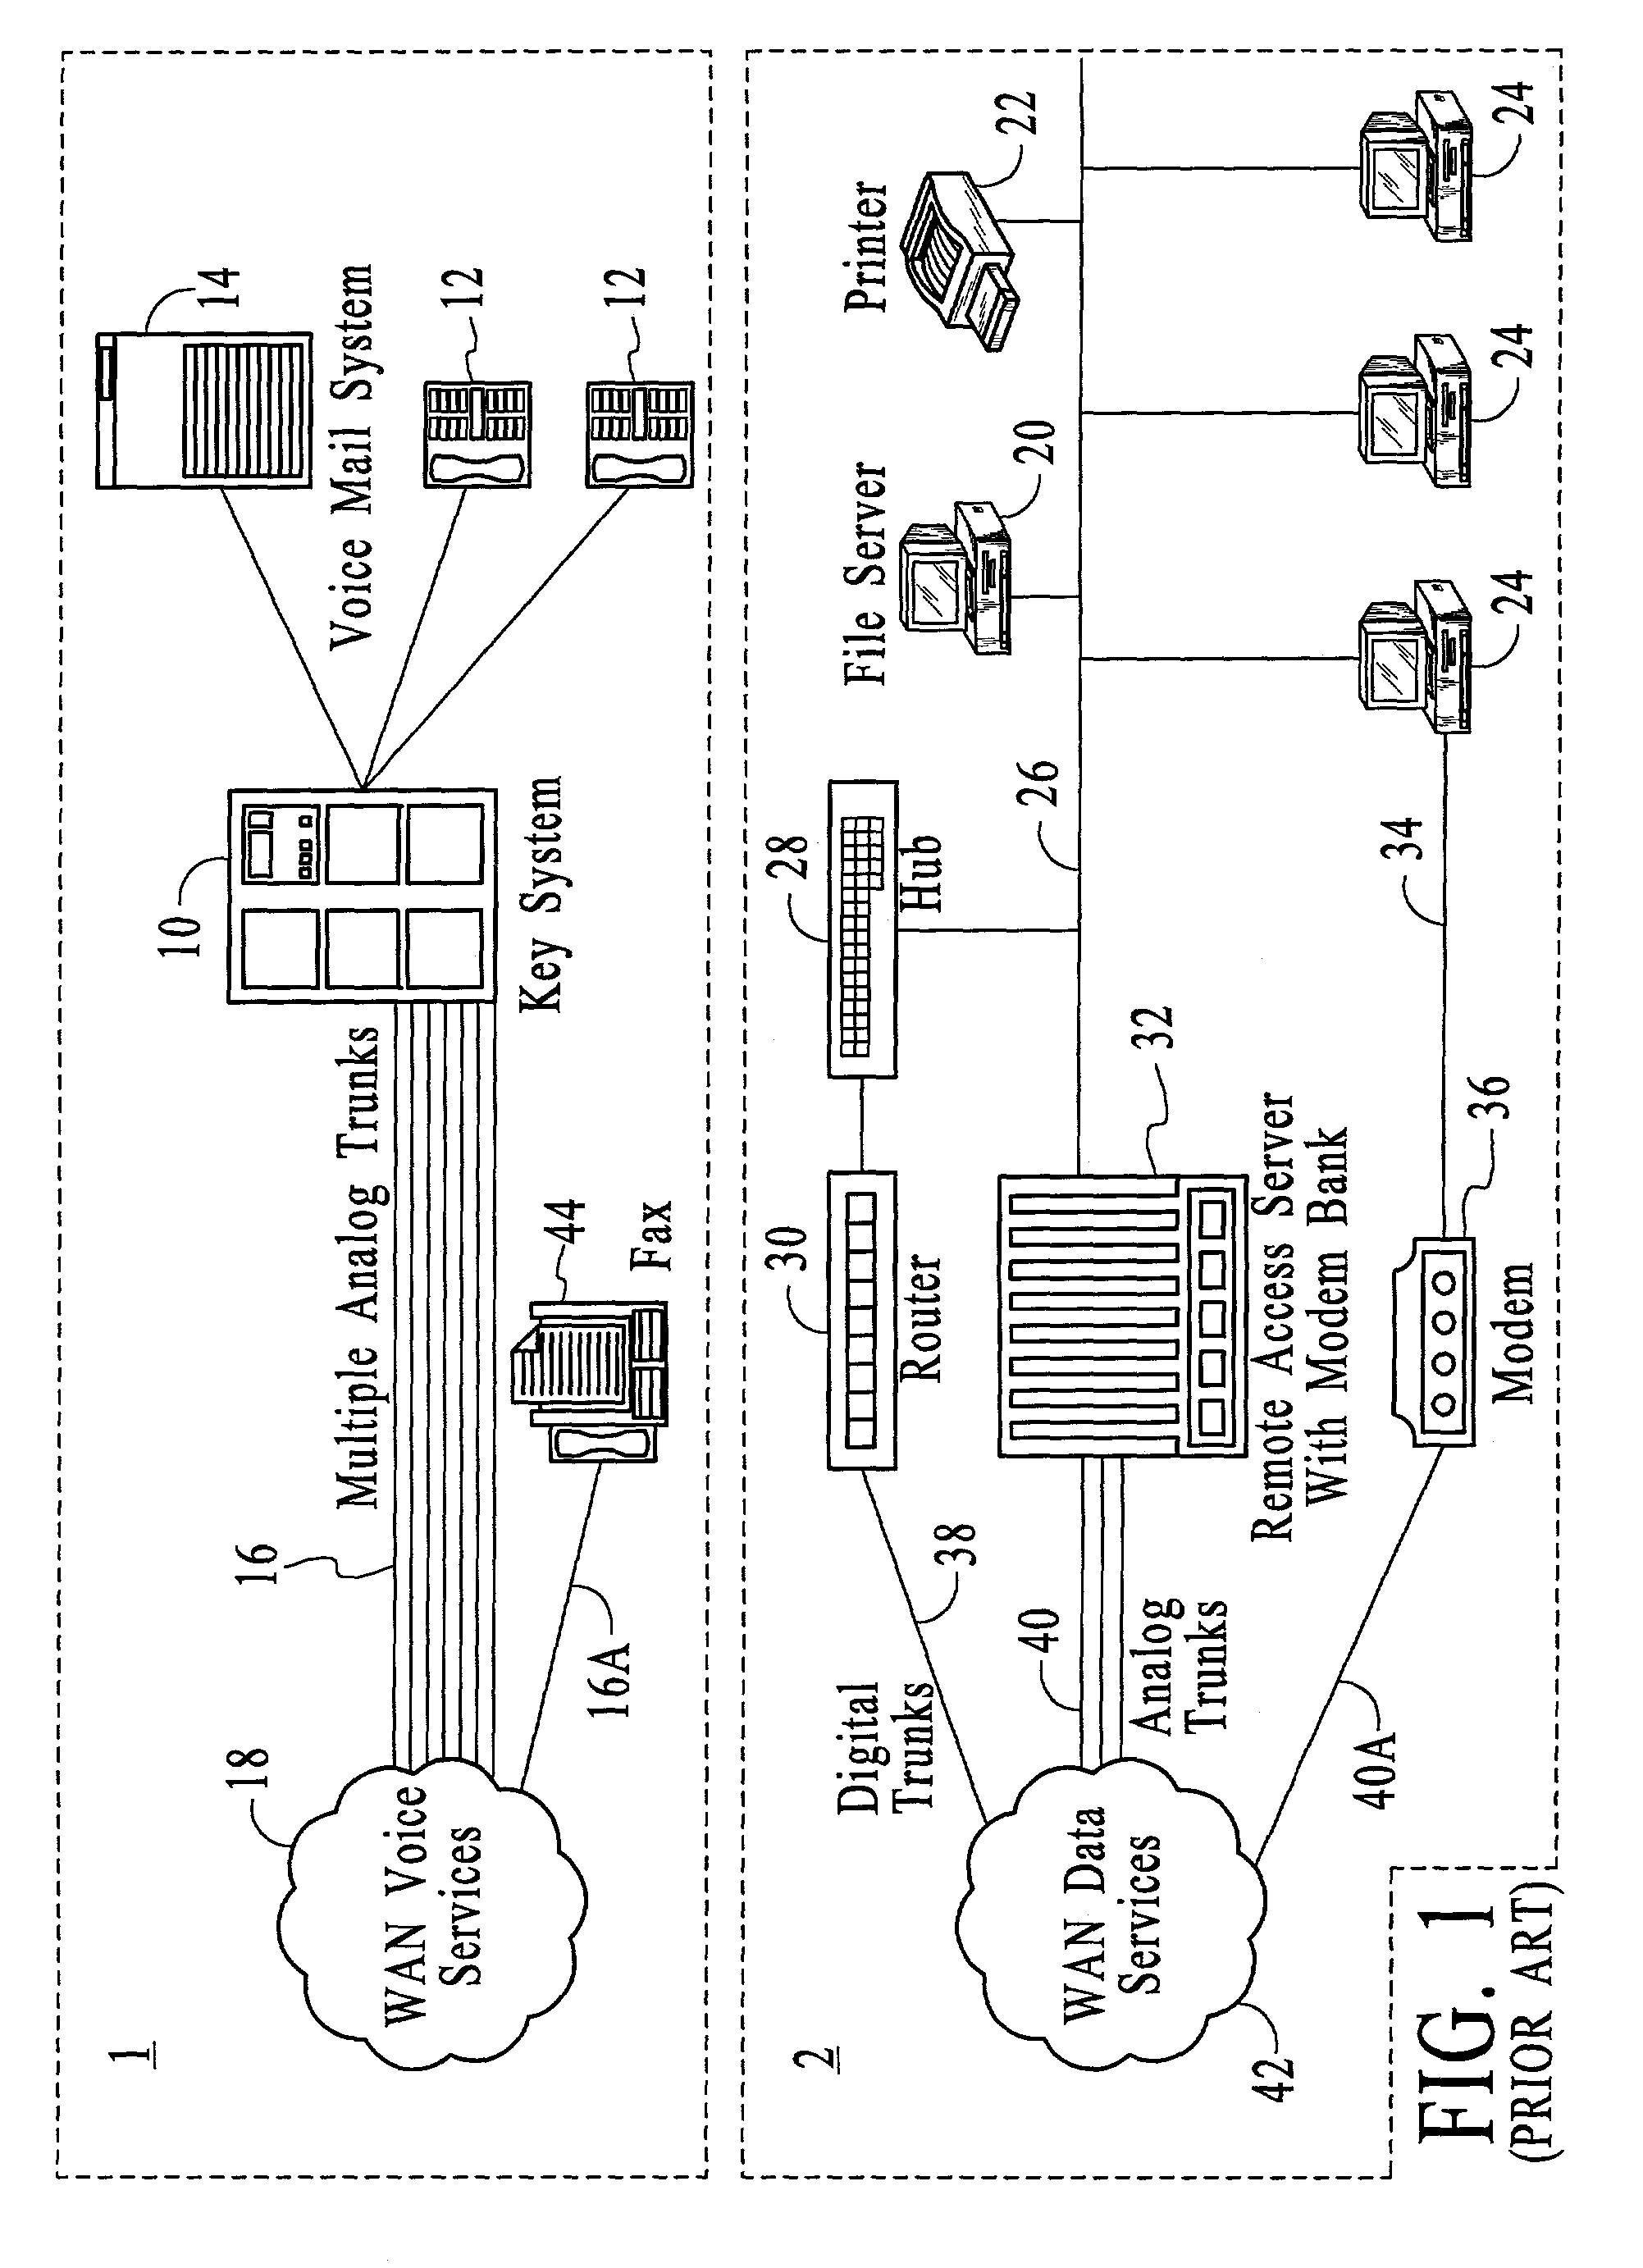 Systems and methods for voice and data communications including hybrid key system/PBX functionality